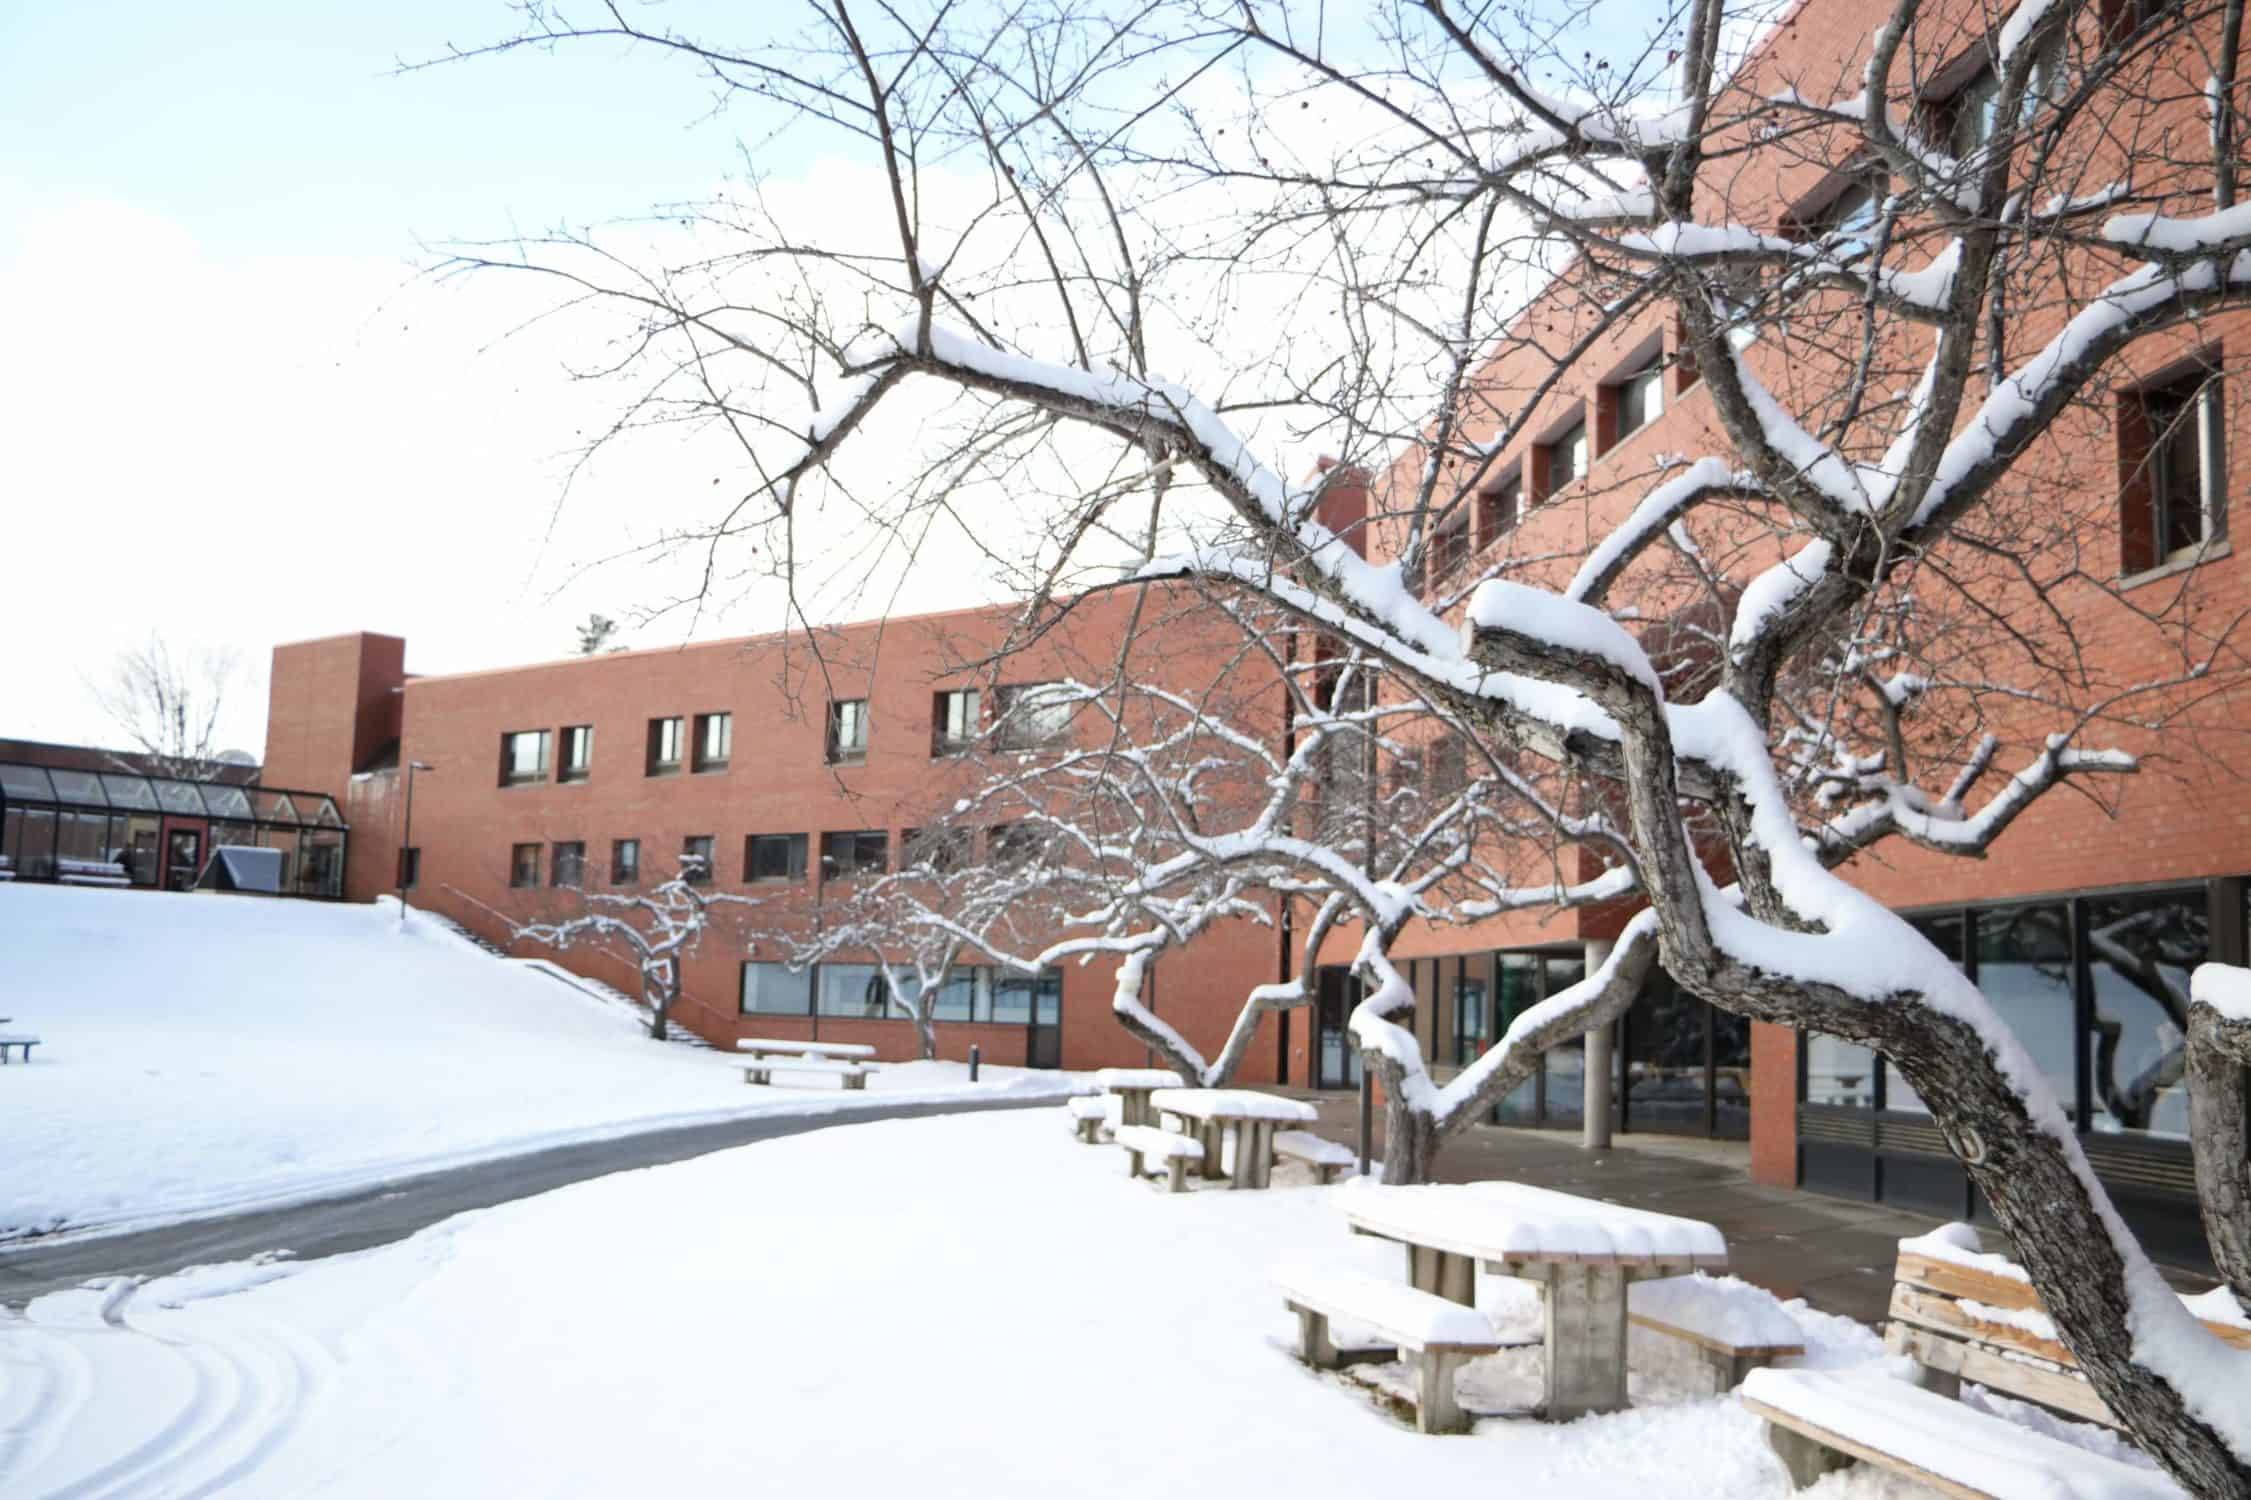 Trees on campus have their branches blanketed in snow